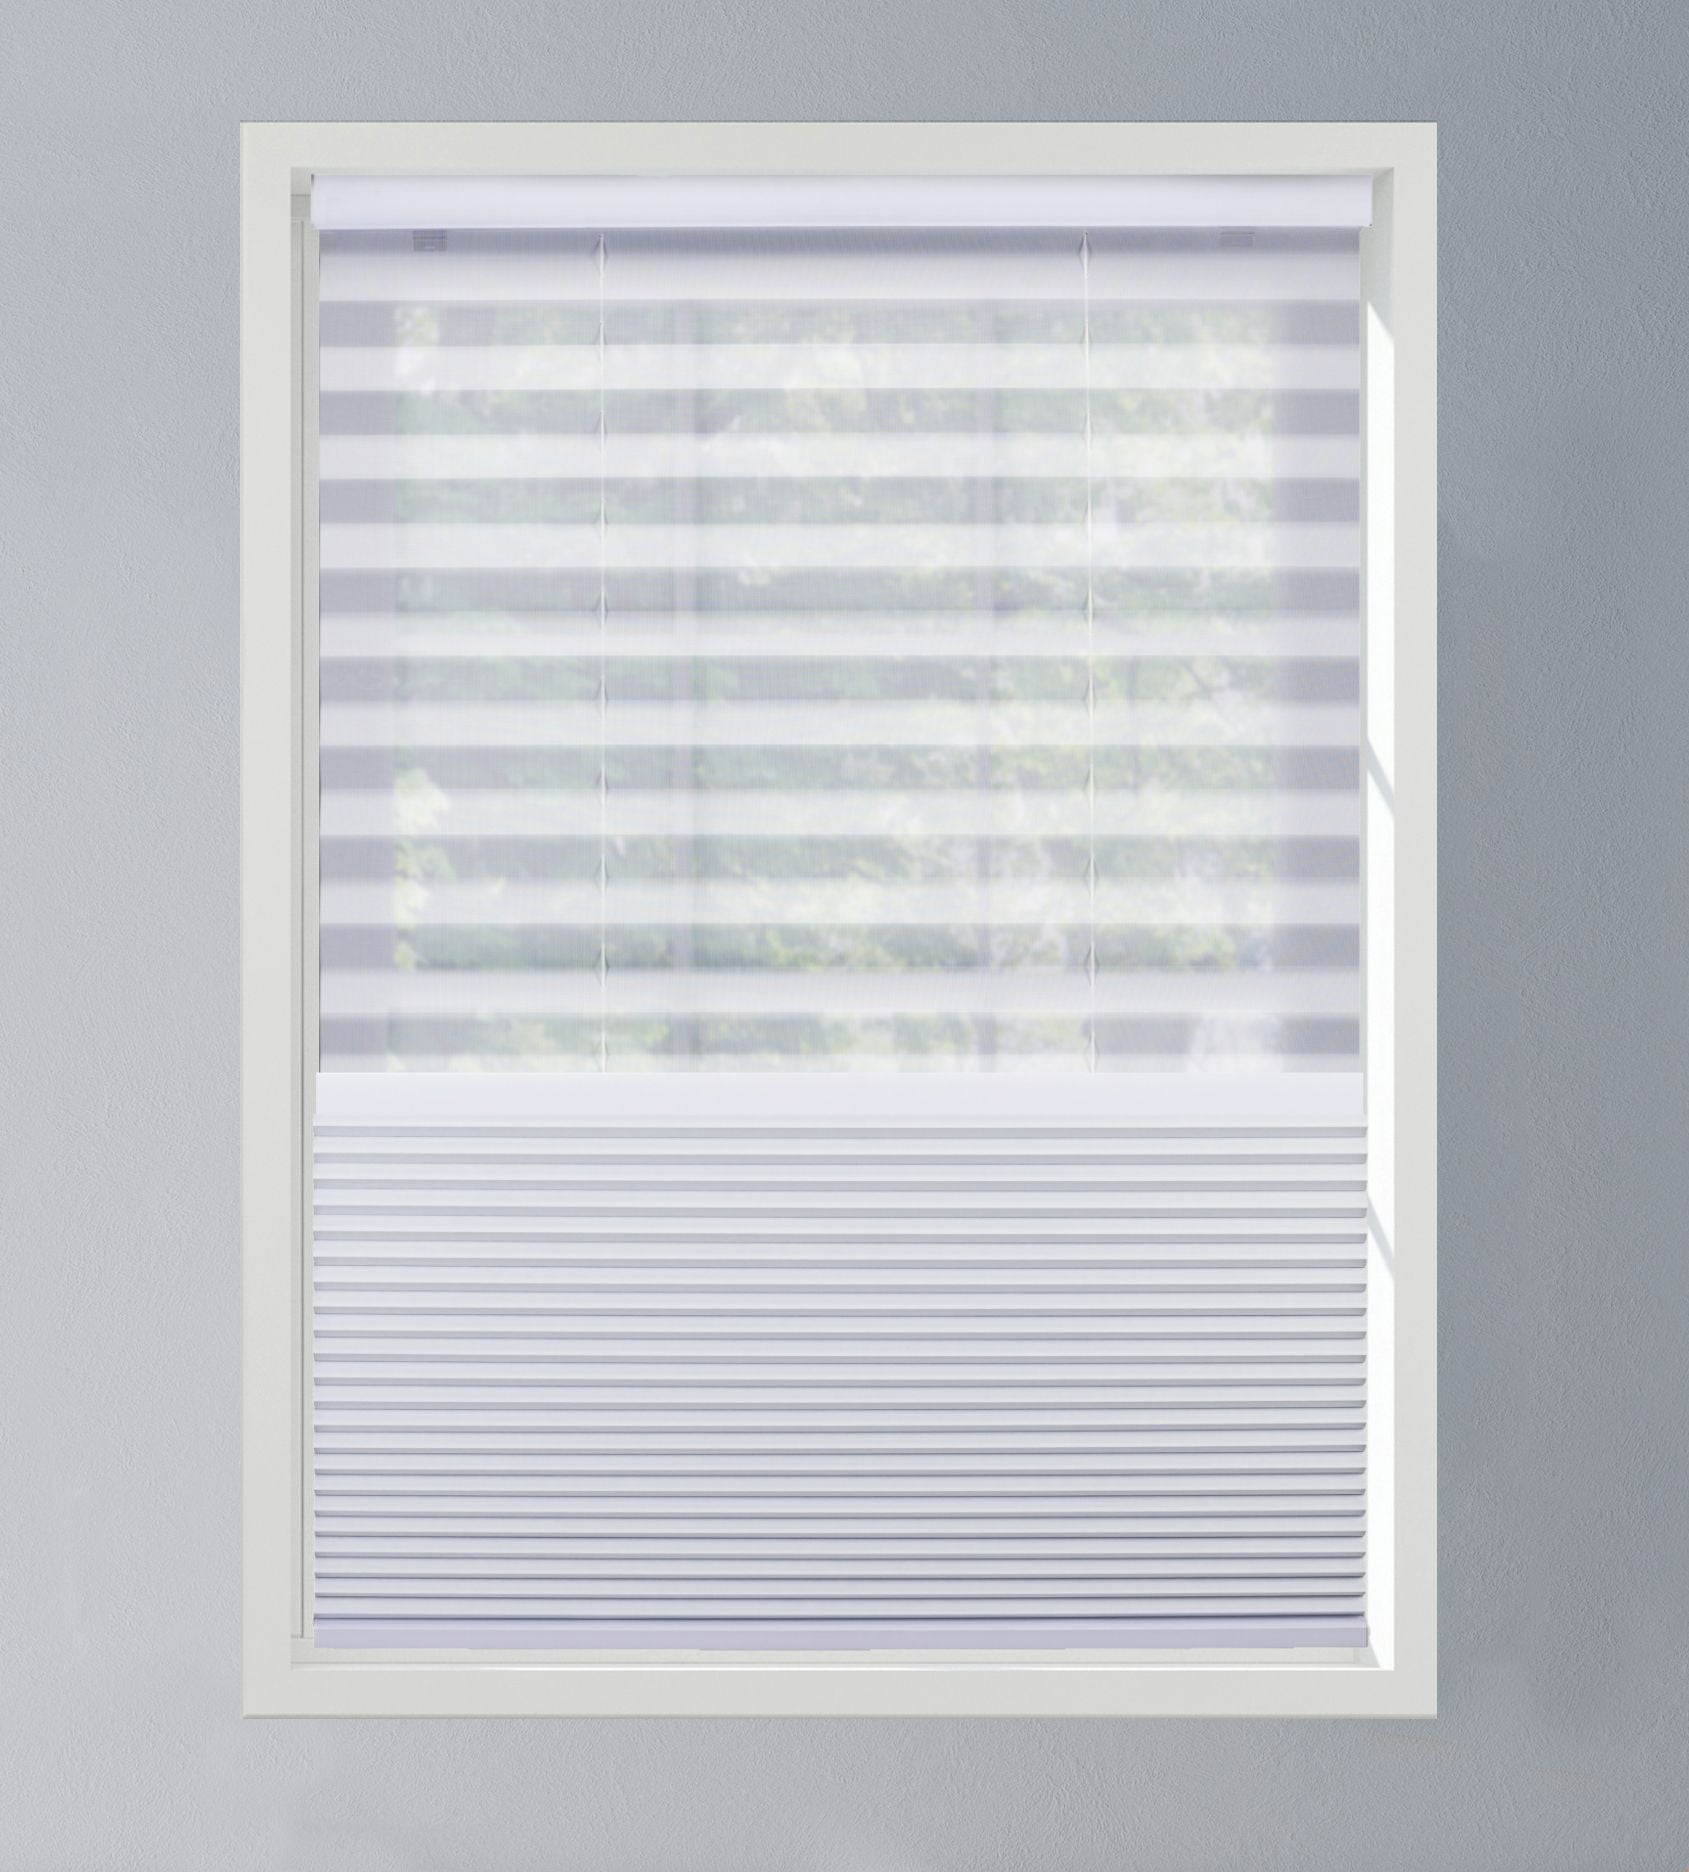 Cool White 2 Shades in 1-Blackout and Light Filtering in one Shade 57W x 60H Windowsandgarden Cordless Day/Night Cellular Shade